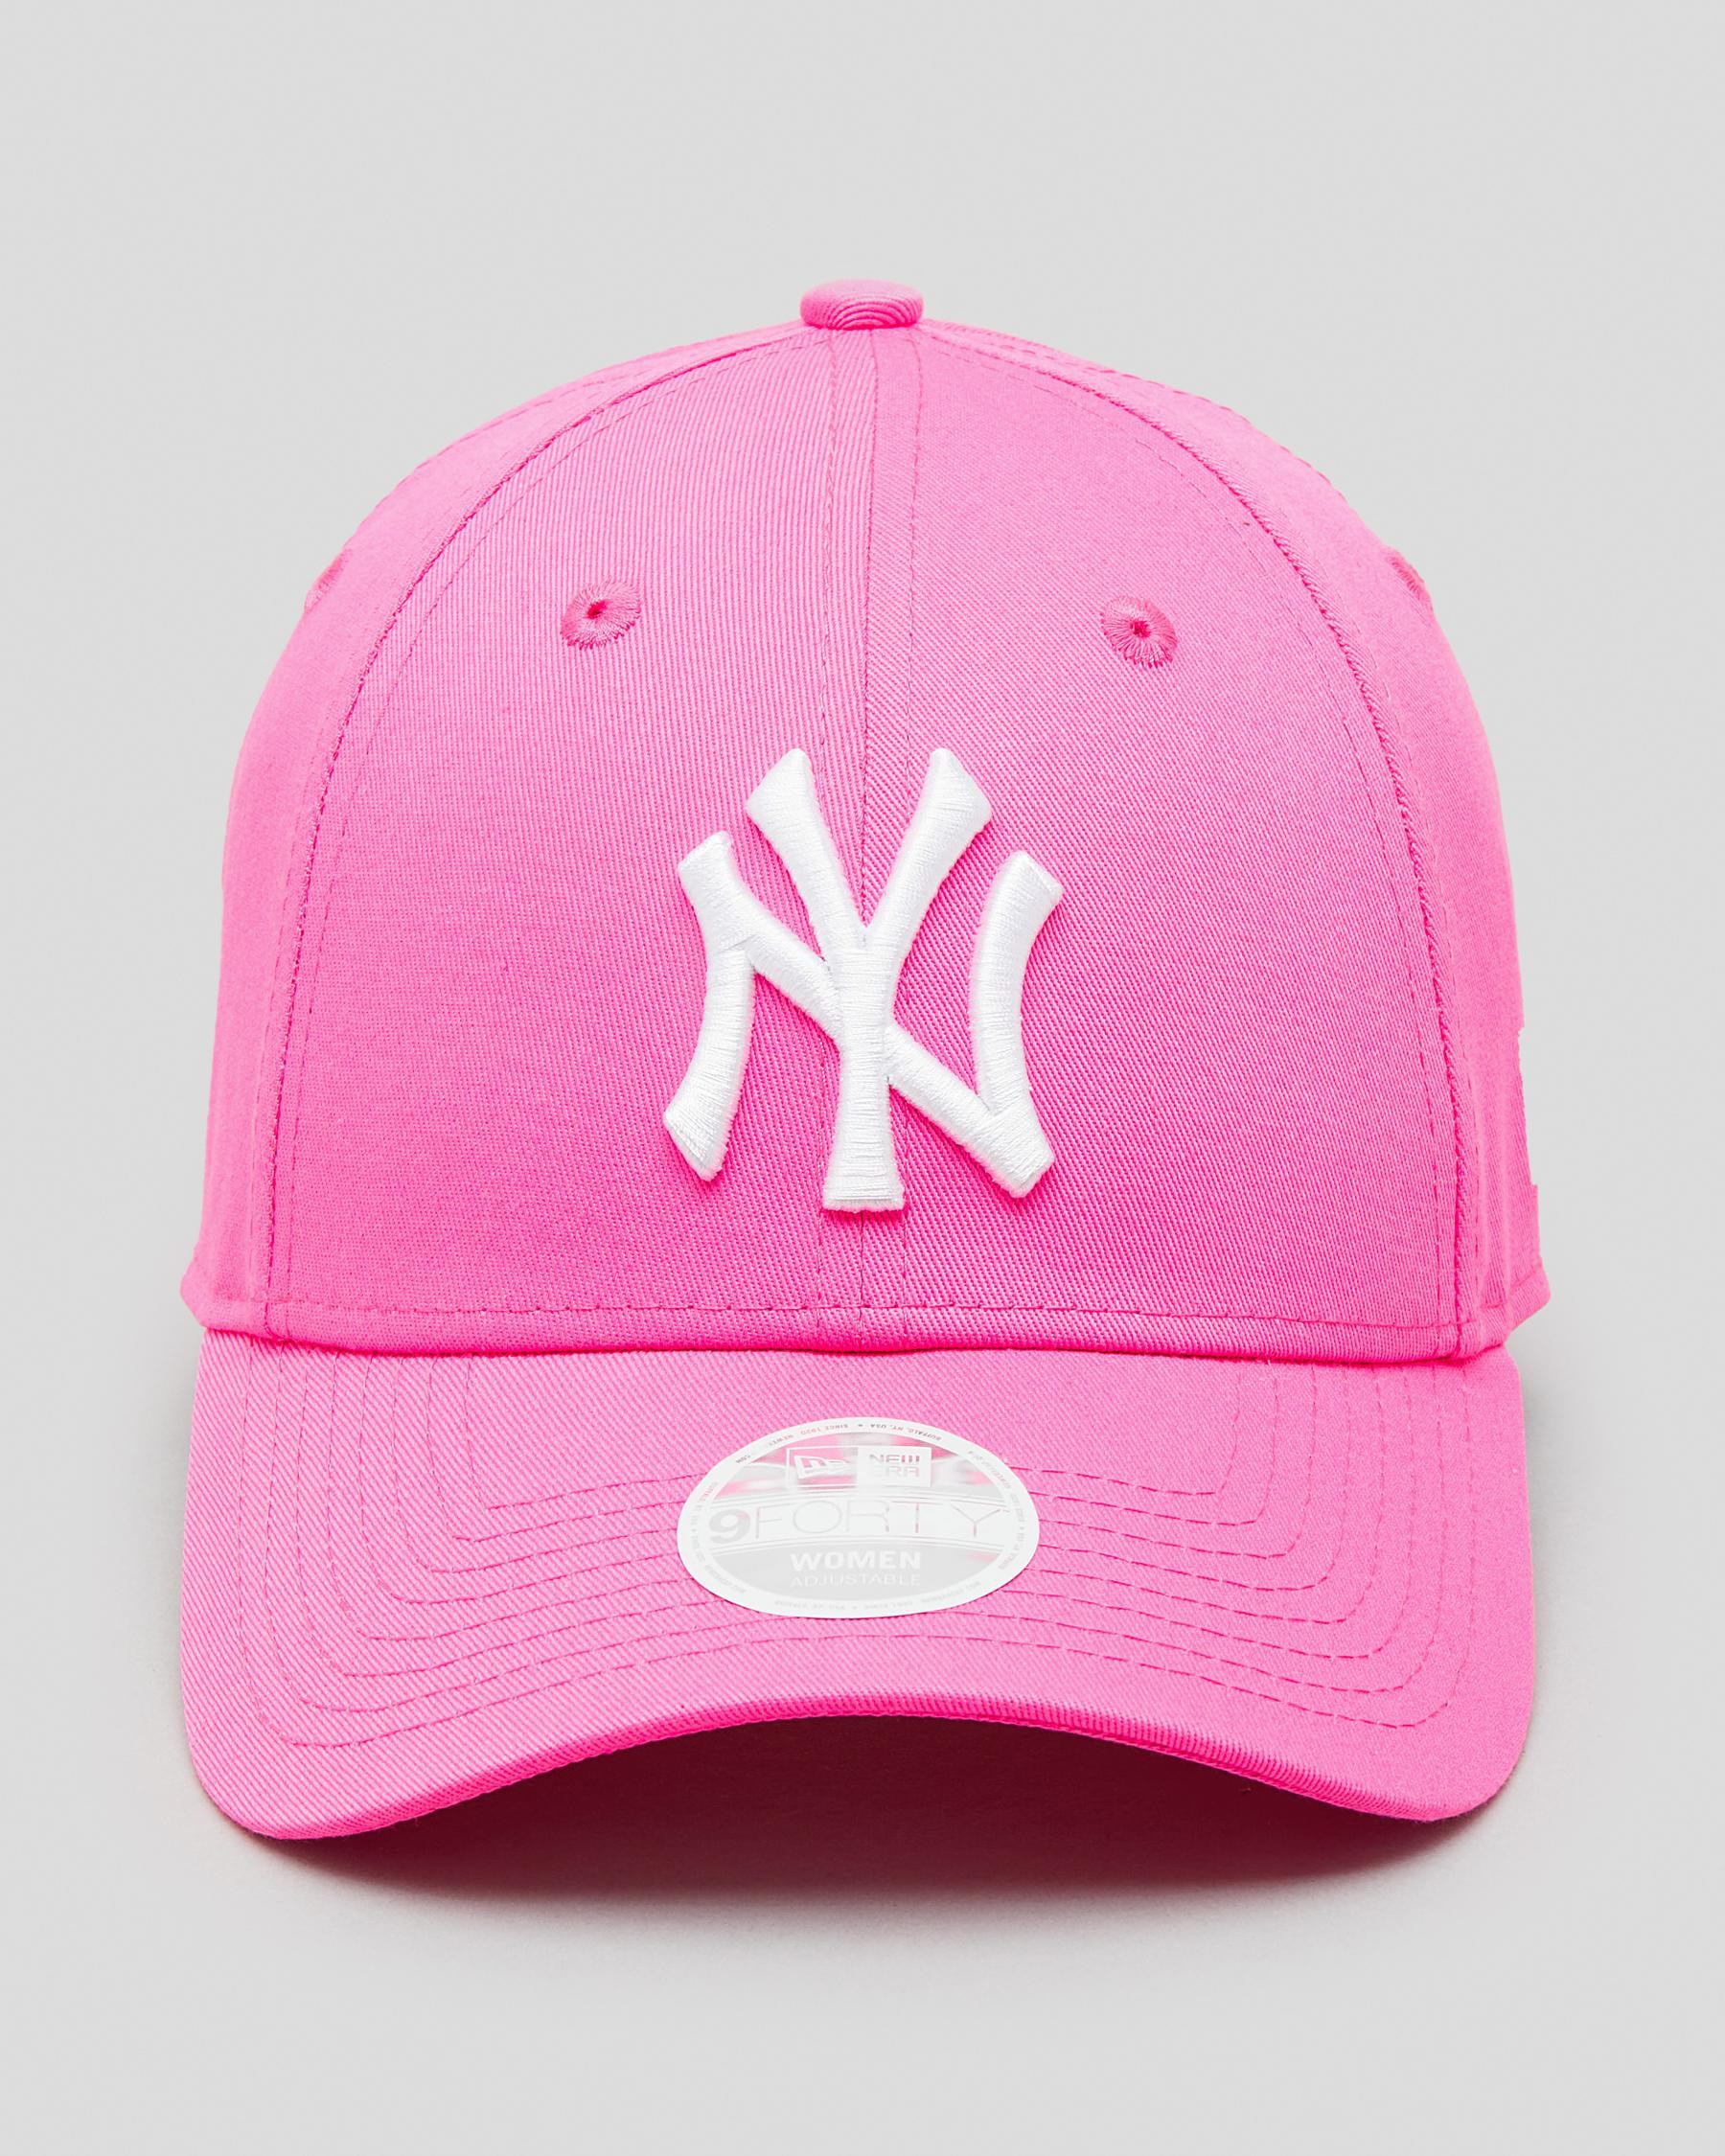 New Era NY Yankees Cap In Pink - FREE* Shipping & Easy Returns - City Beach  United States